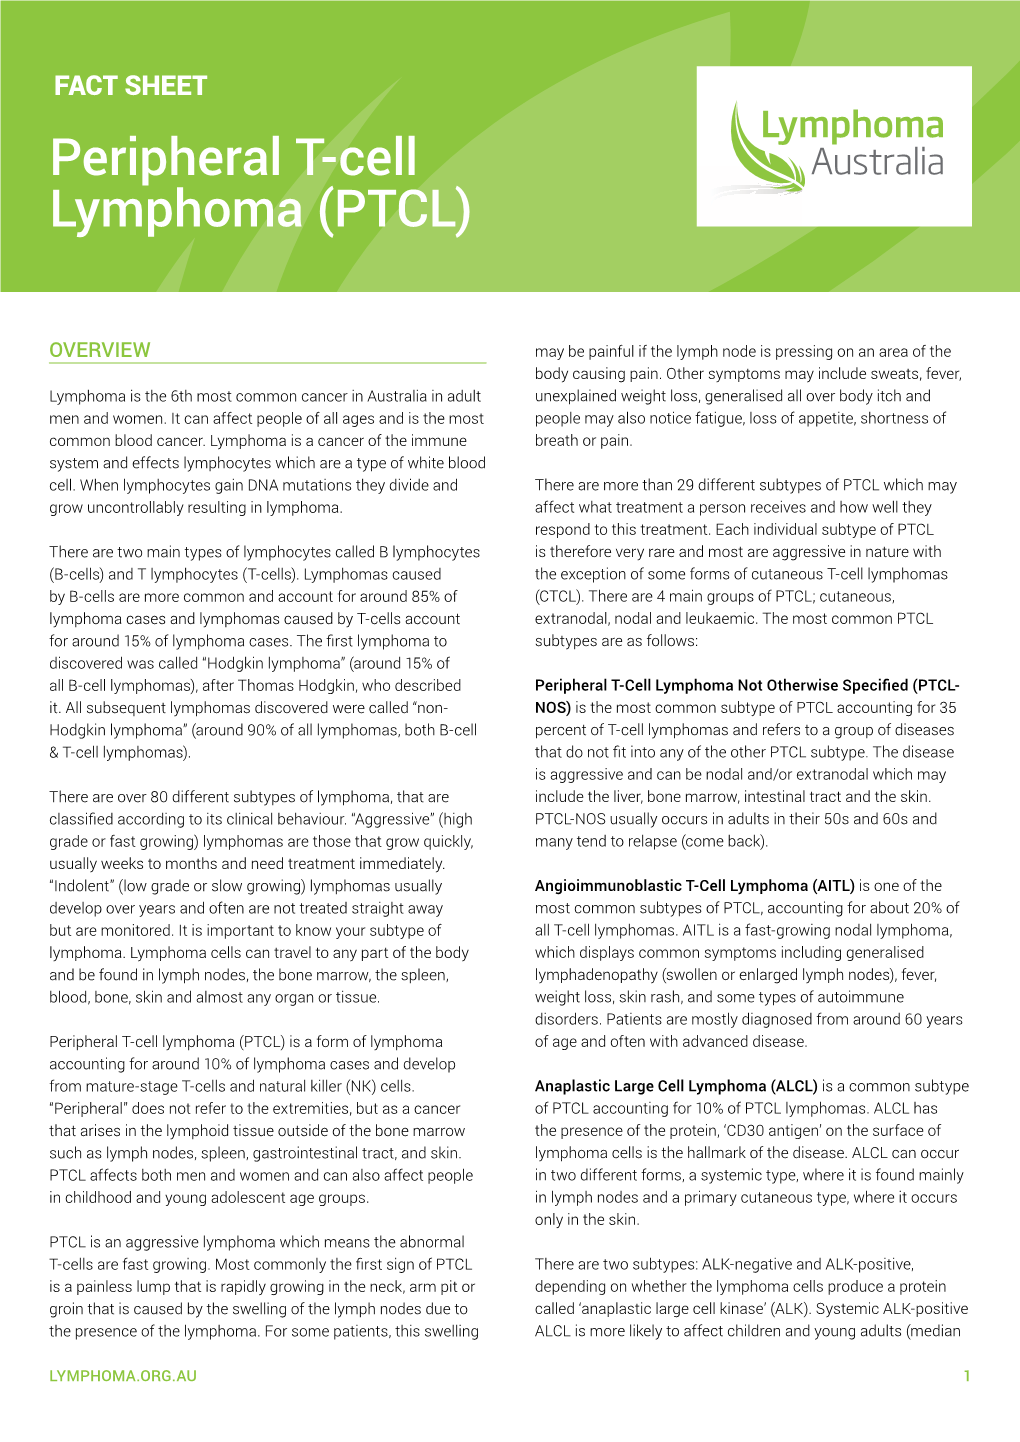 Peripheral T-Cell Lymphoma (PTCL)